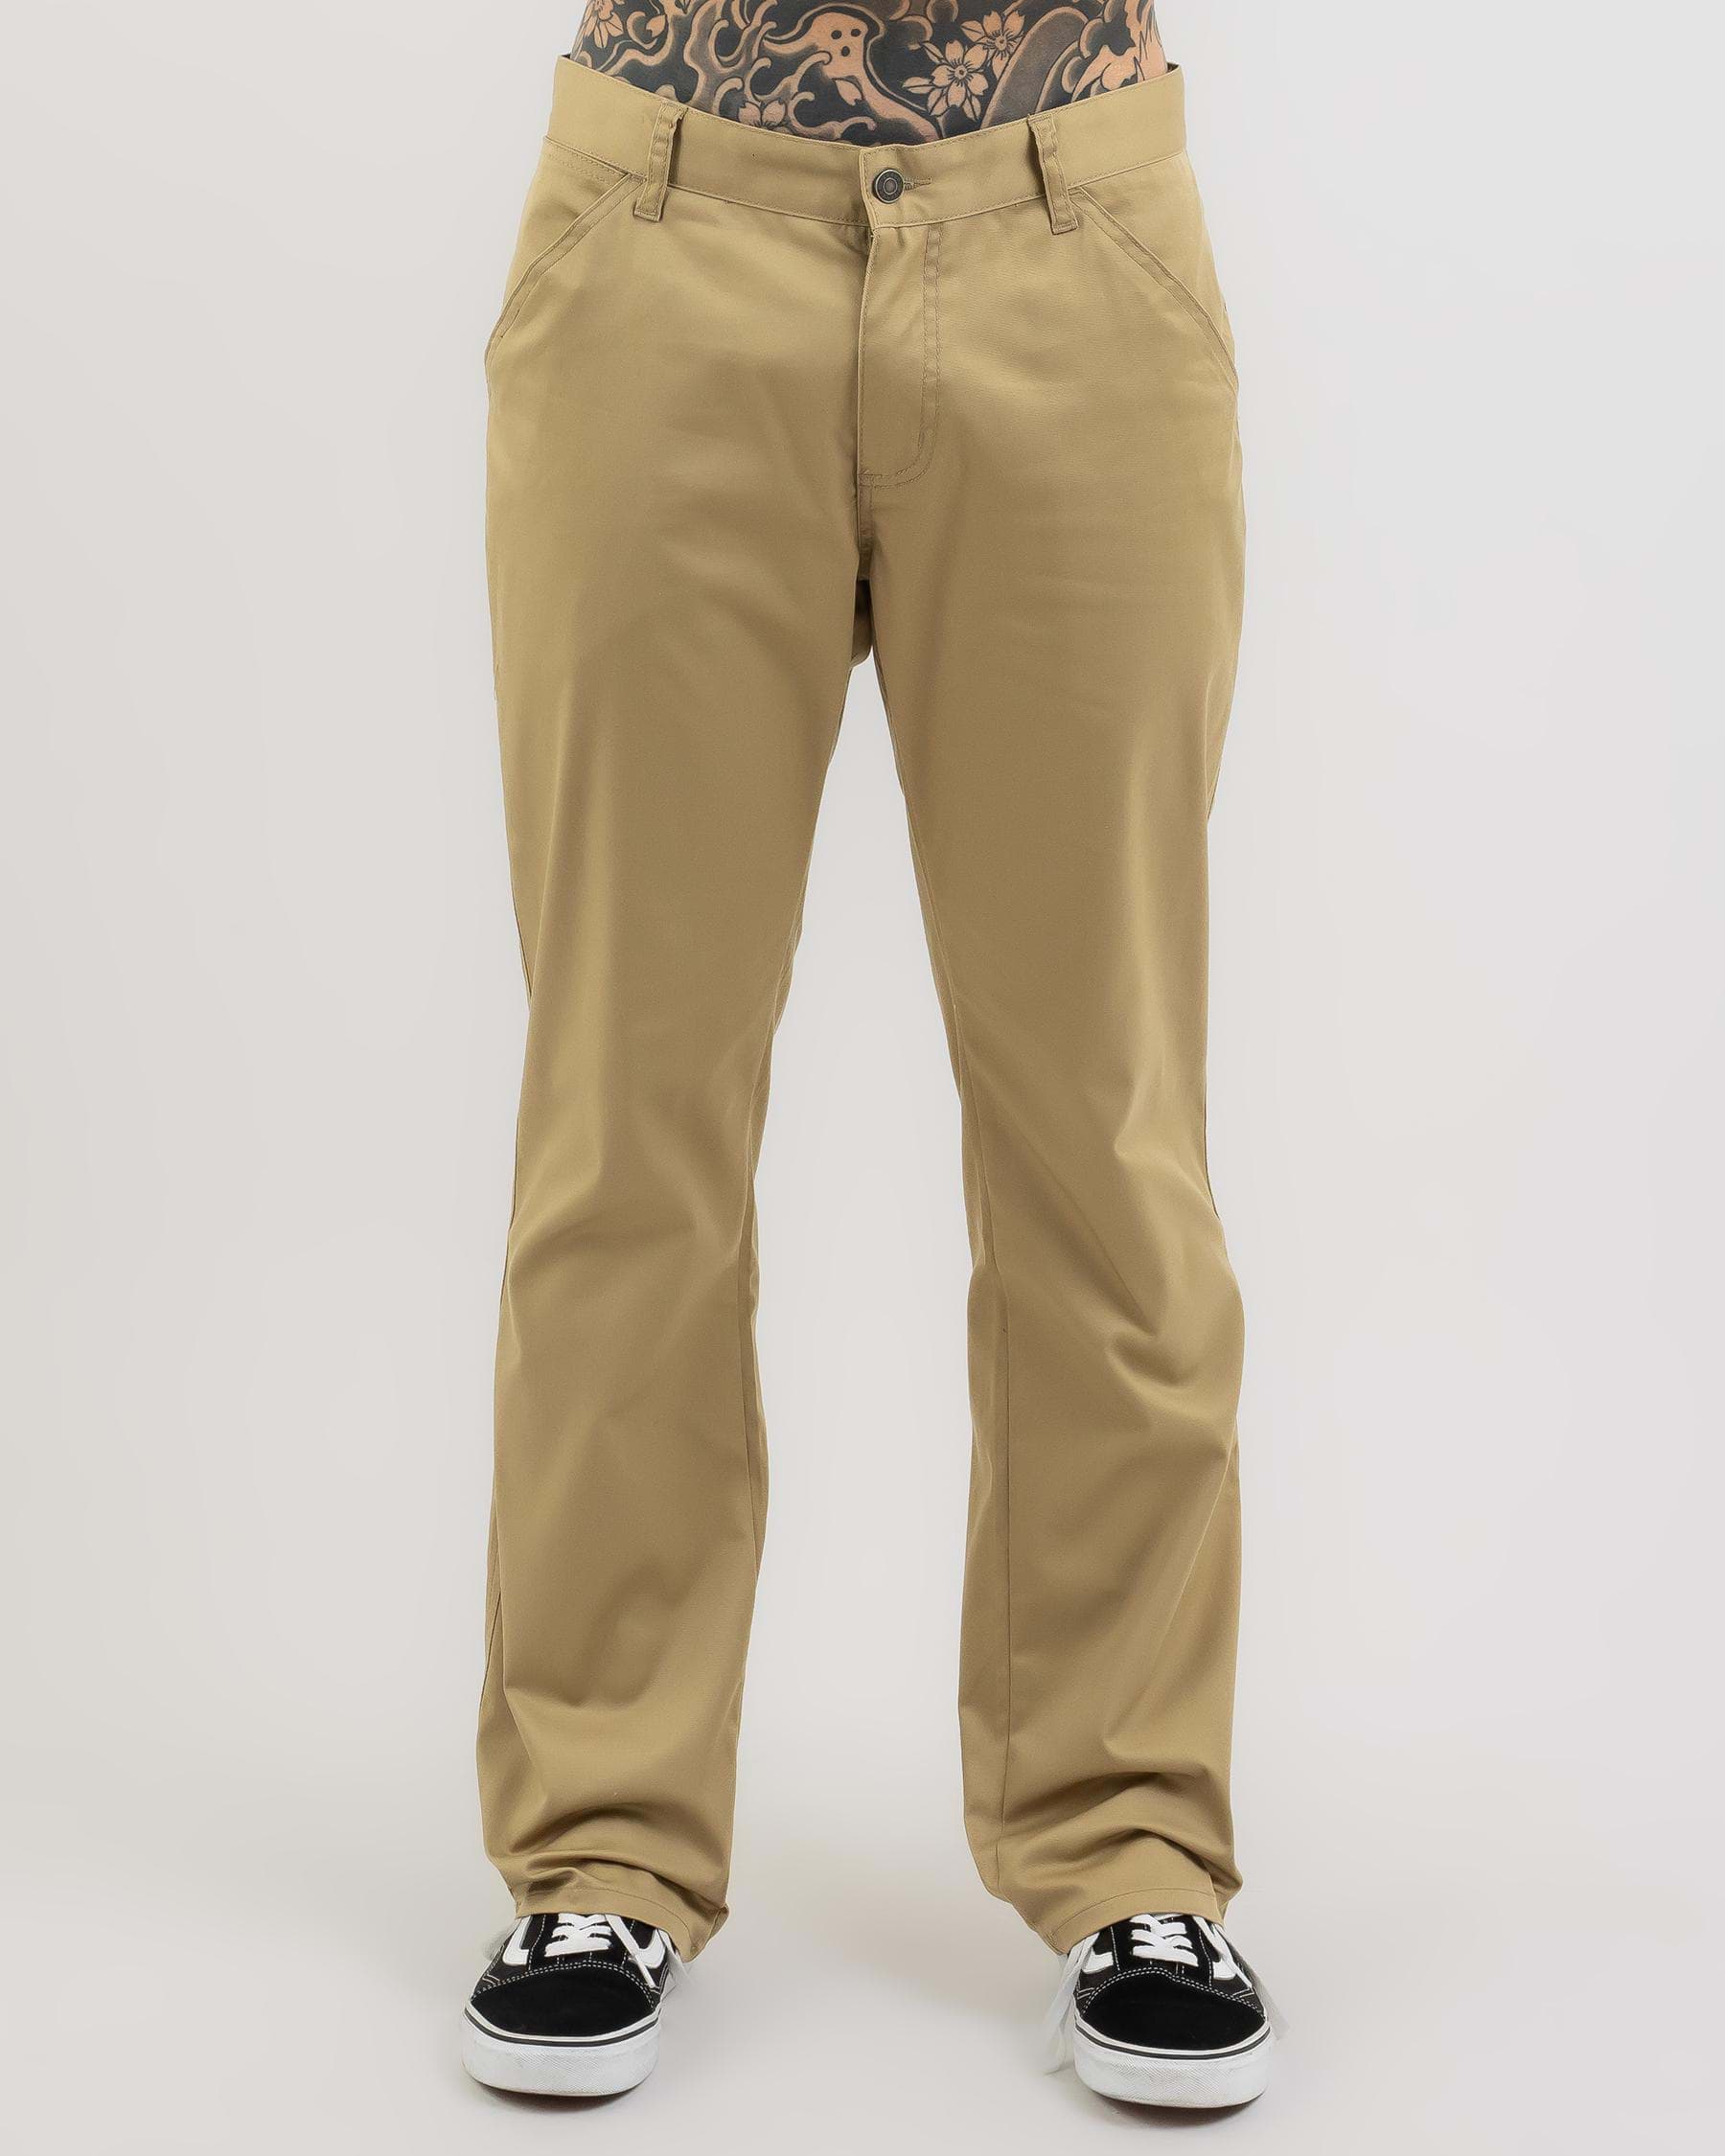 Shop Dexter Swelter Pants In Sand - Fast Shipping & Easy Returns - City ...